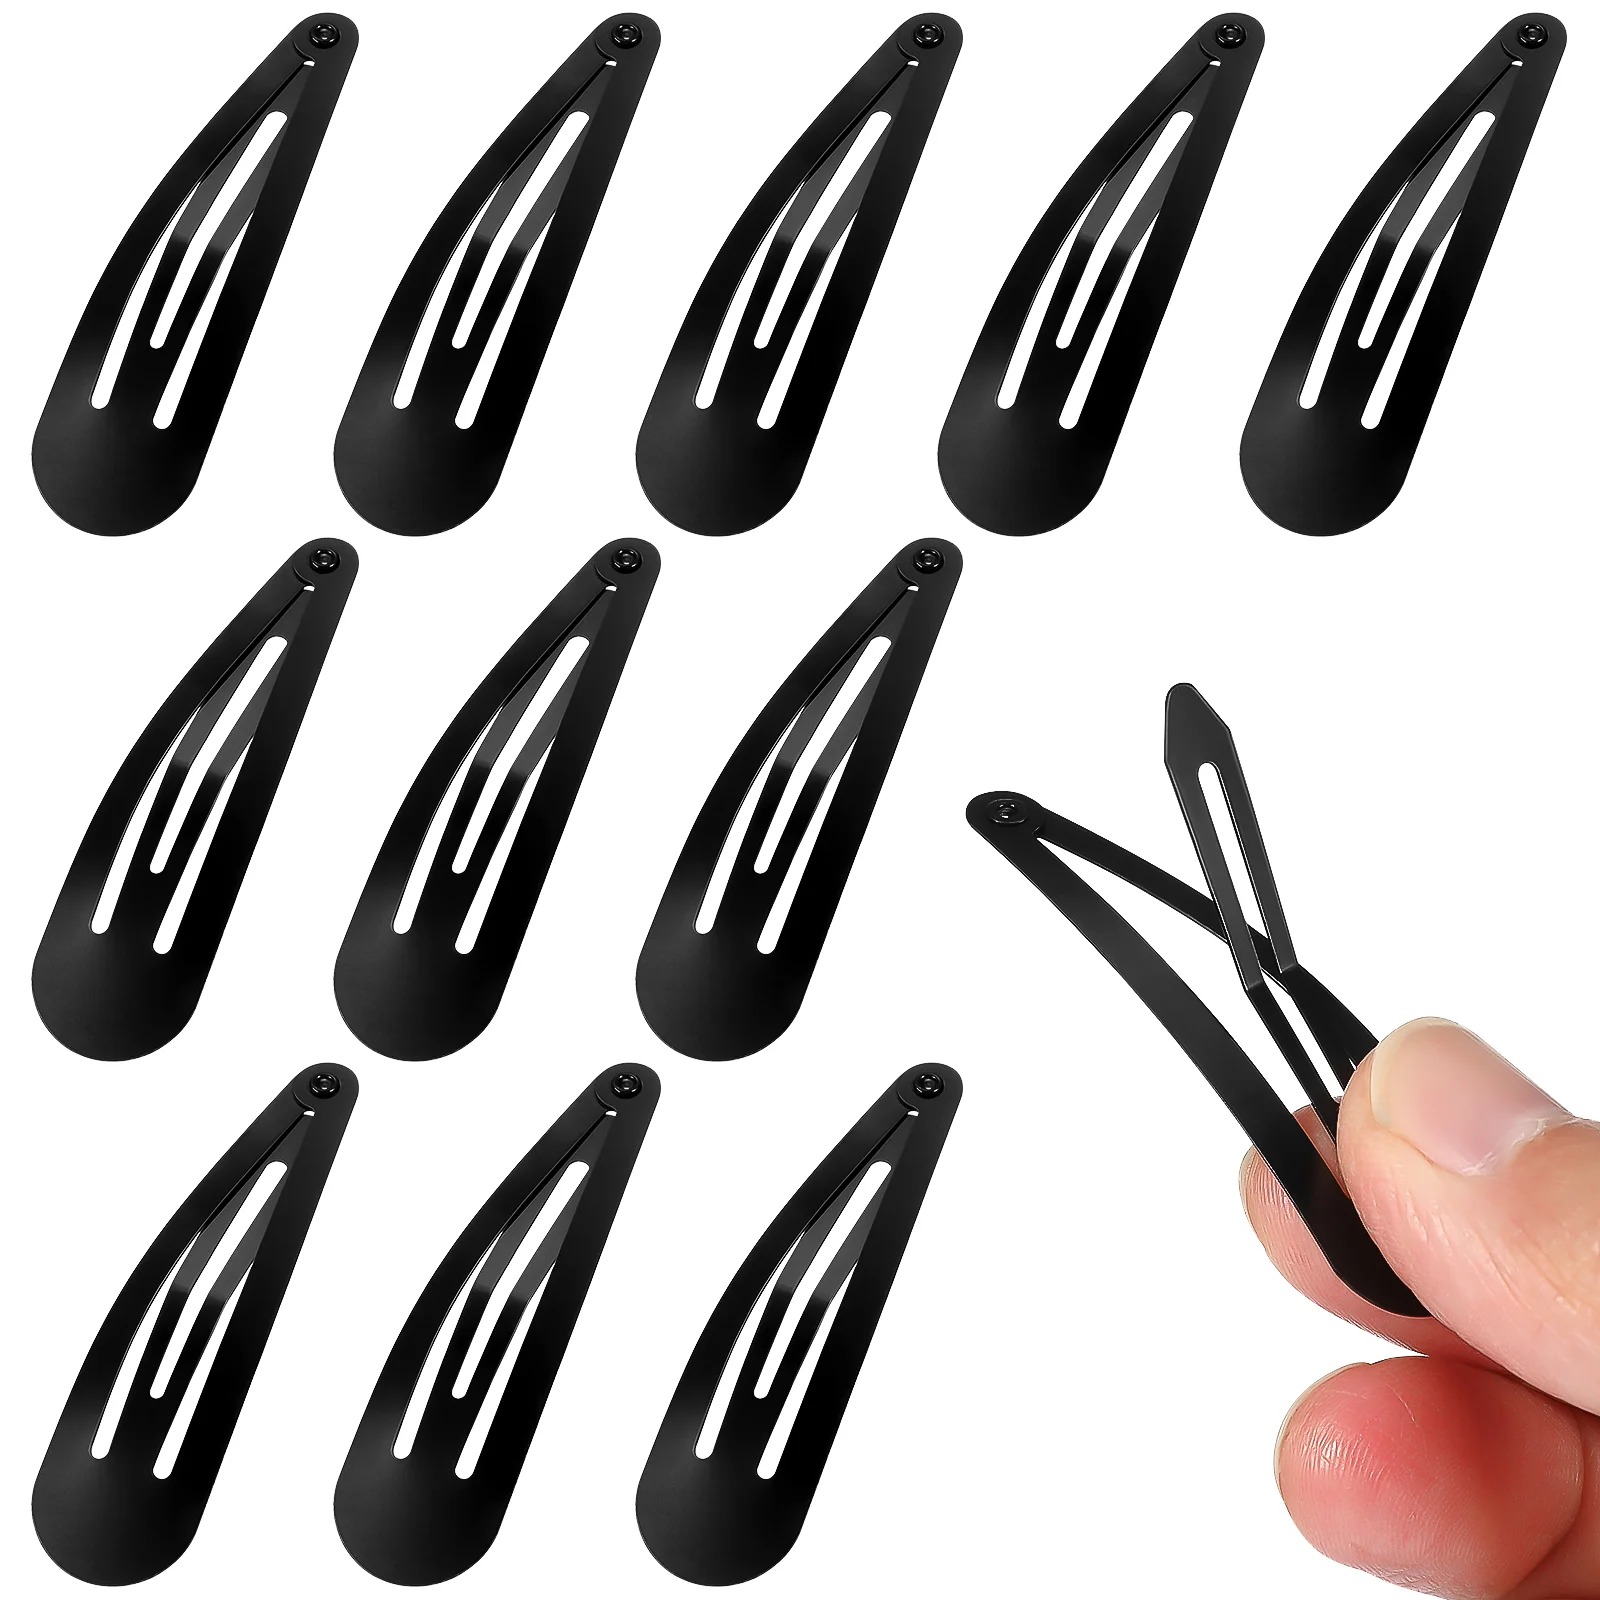 

50 Pcs Metal Snap Buttons Hair Clips Hairclips Black Accessories Barrettes Women Small Girls Styling Tools Miss